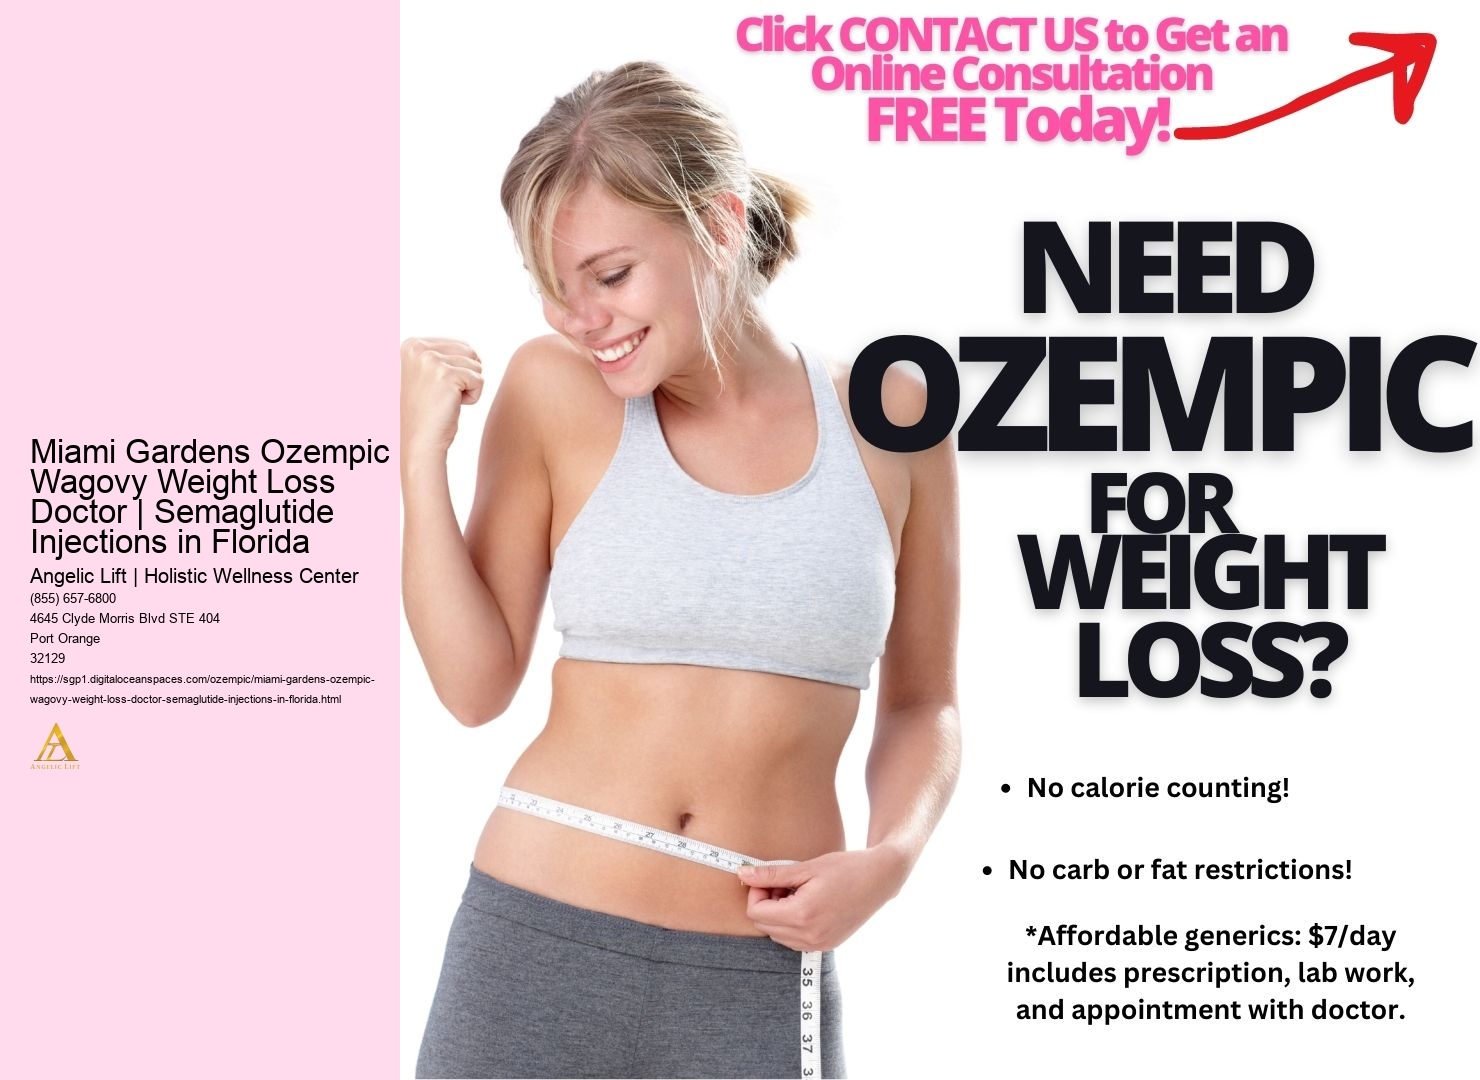 Miami Gardens Ozempic & Wagovy Weight Loss Doctor | Semaglutide Injections in Florida